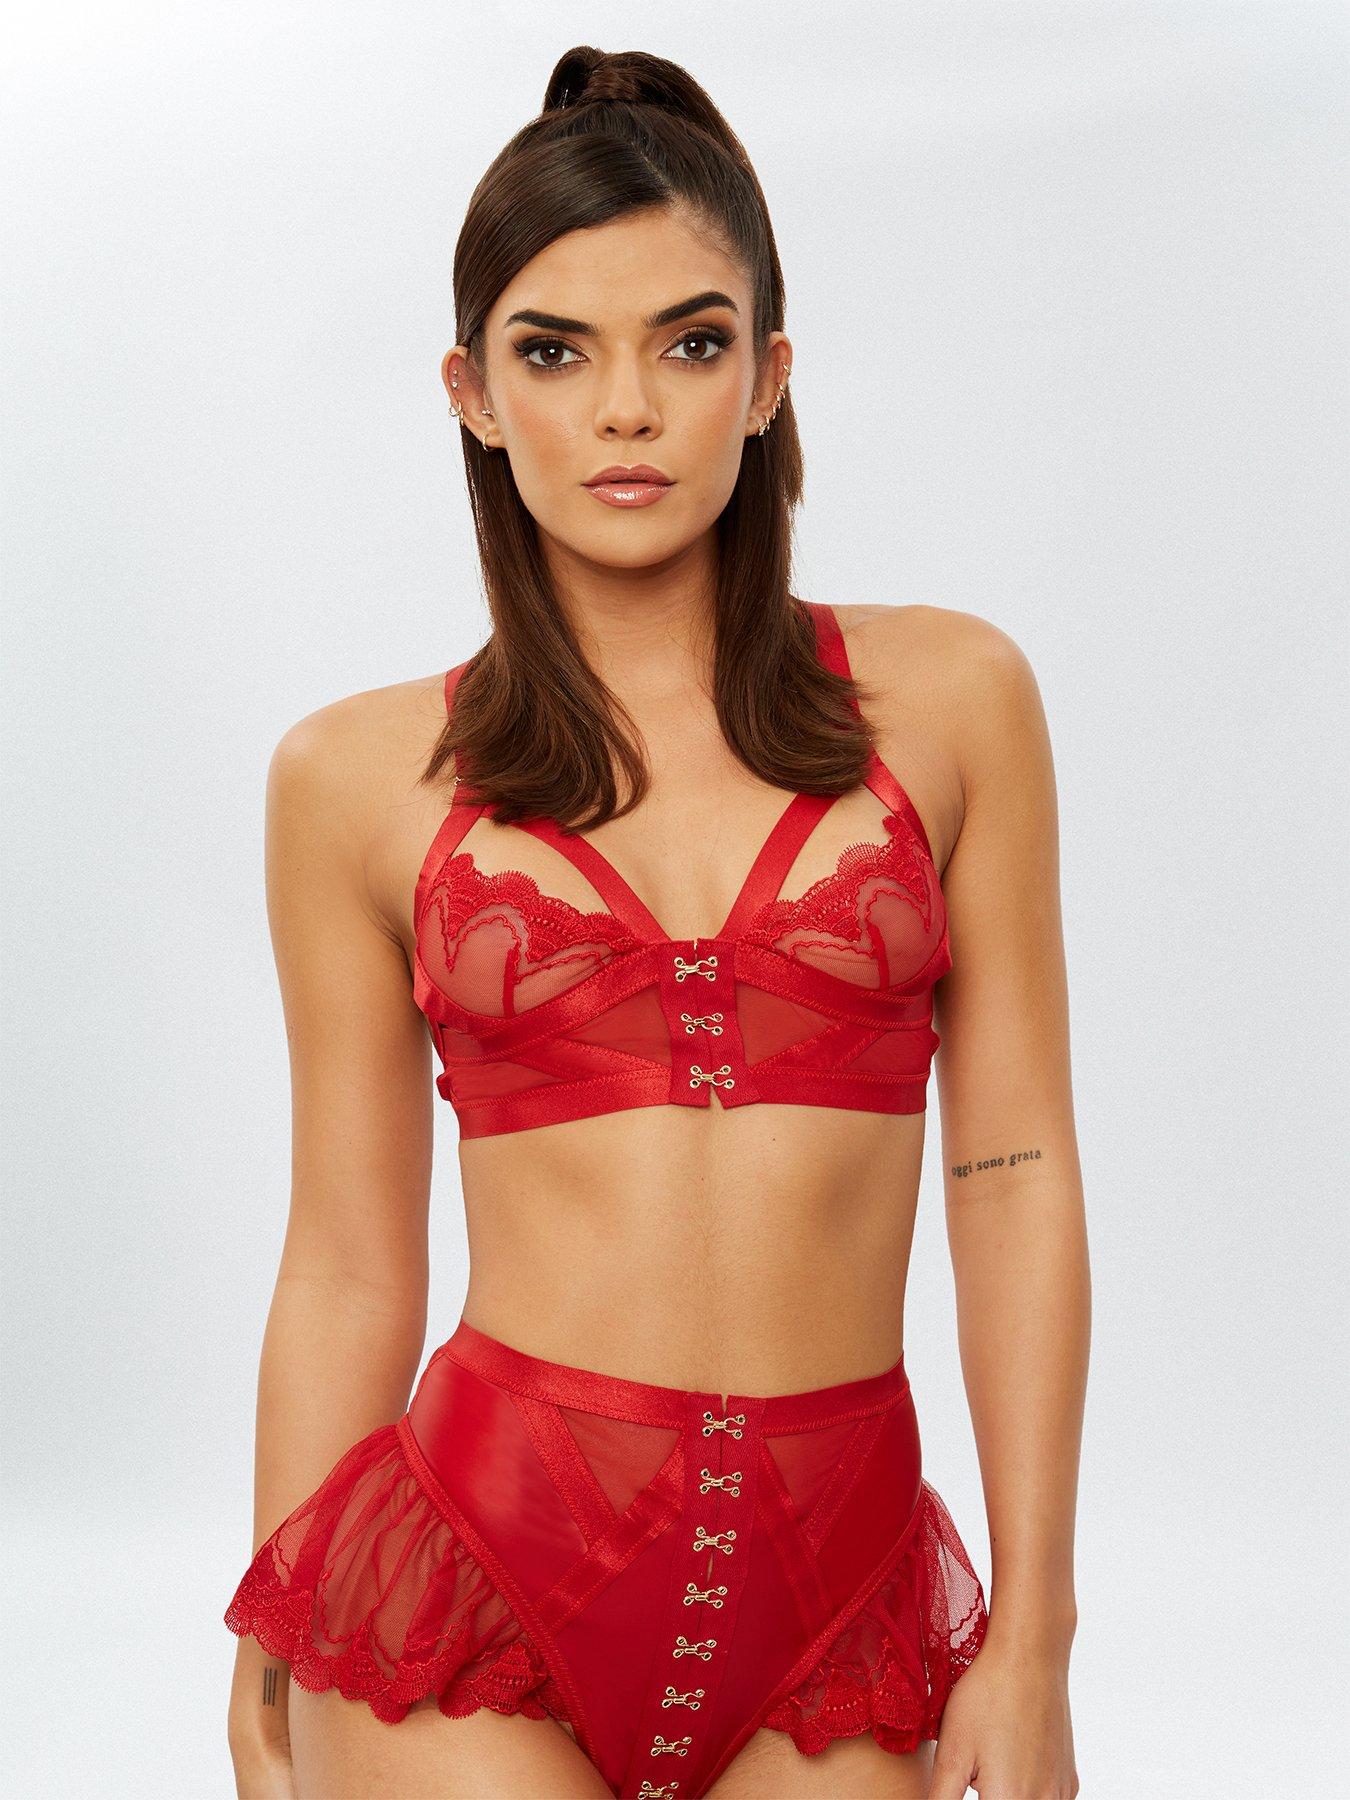 Ann Summers Bodywear The Extrovert Crotchless Set - Bright Red